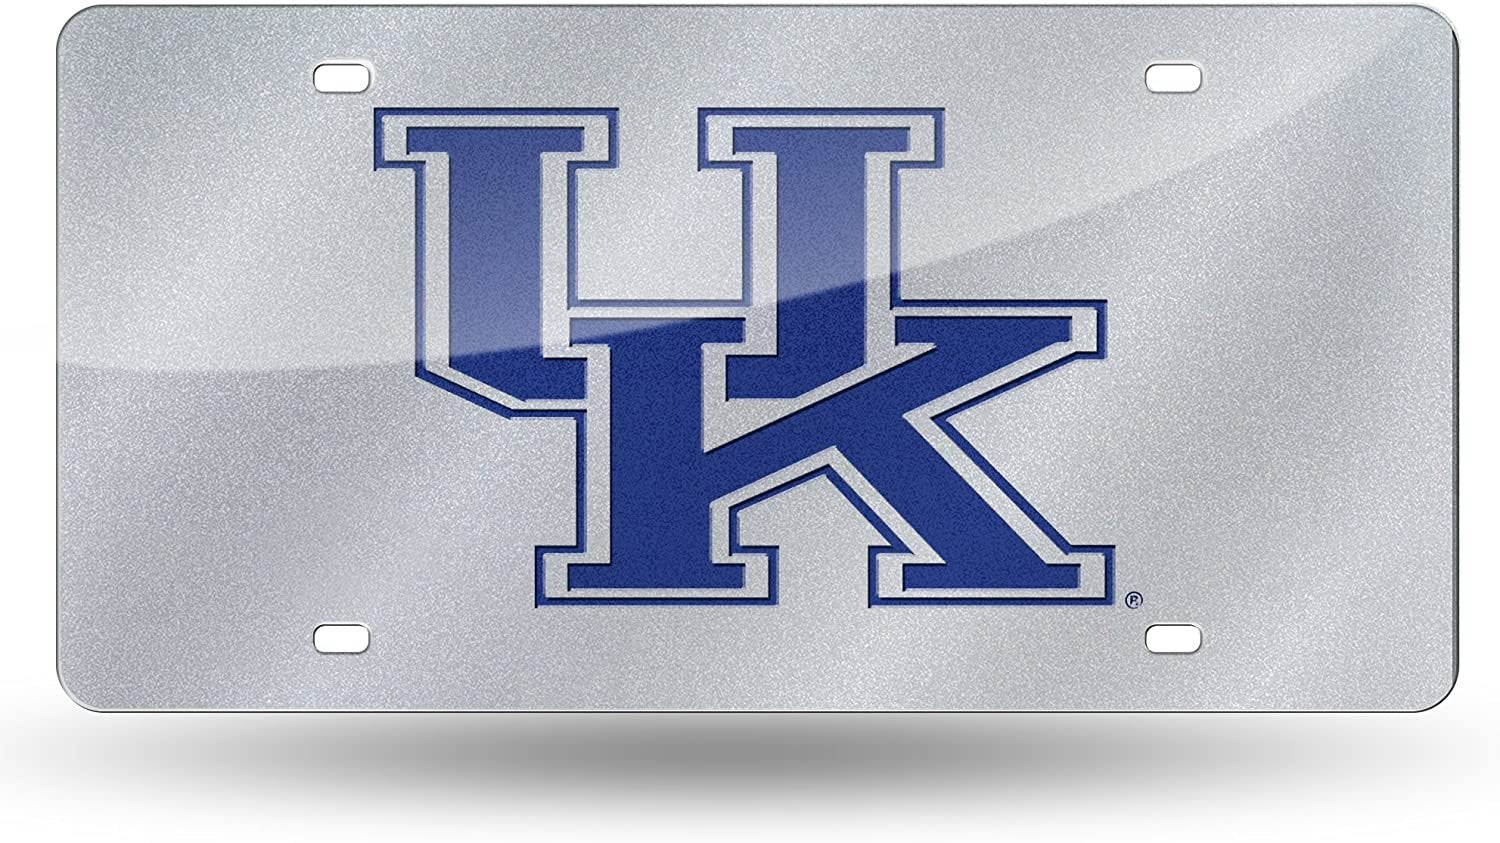 University of Kentucky Wildcats Premium Laser Cut Tag License Plate, Bling Style, Mirrored Acrylic Inlaid, 12x6 Inch